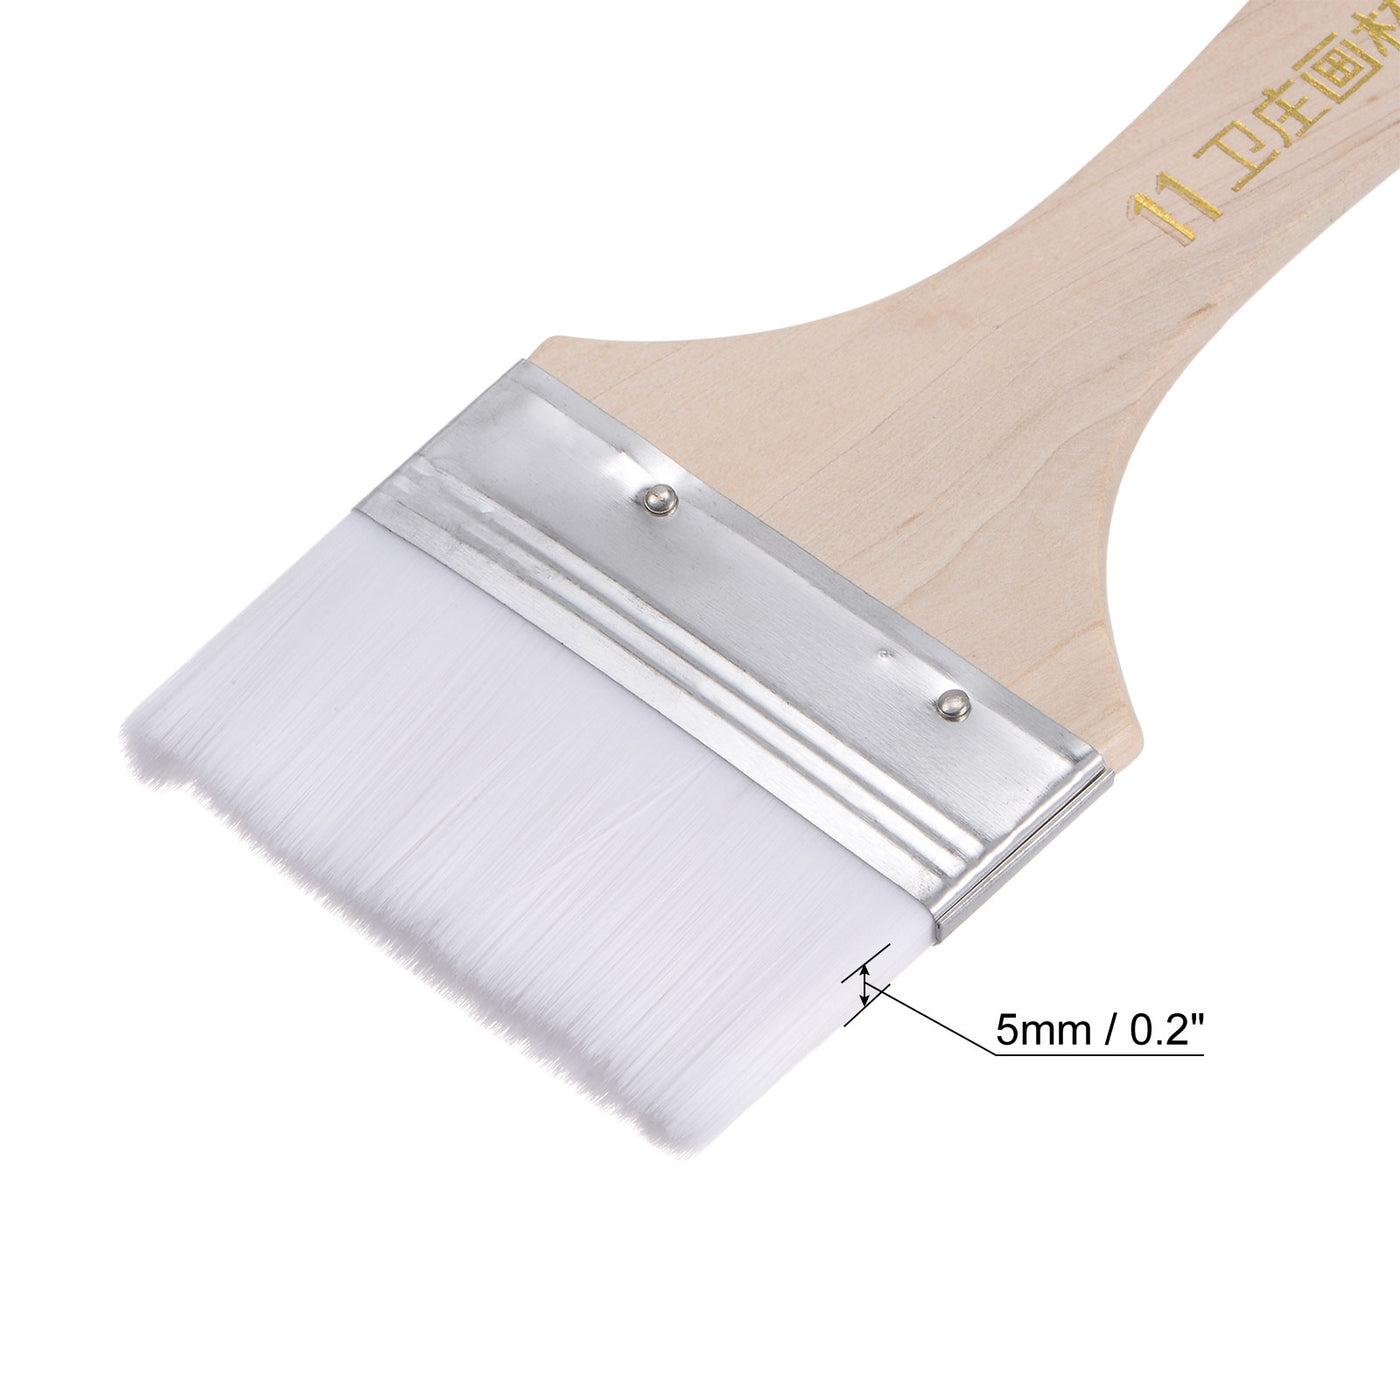 uxcell Uxcell 2.8" Width Small Paint Brush Nylon Bristle with Wood Handle Tool, White 3Pcs